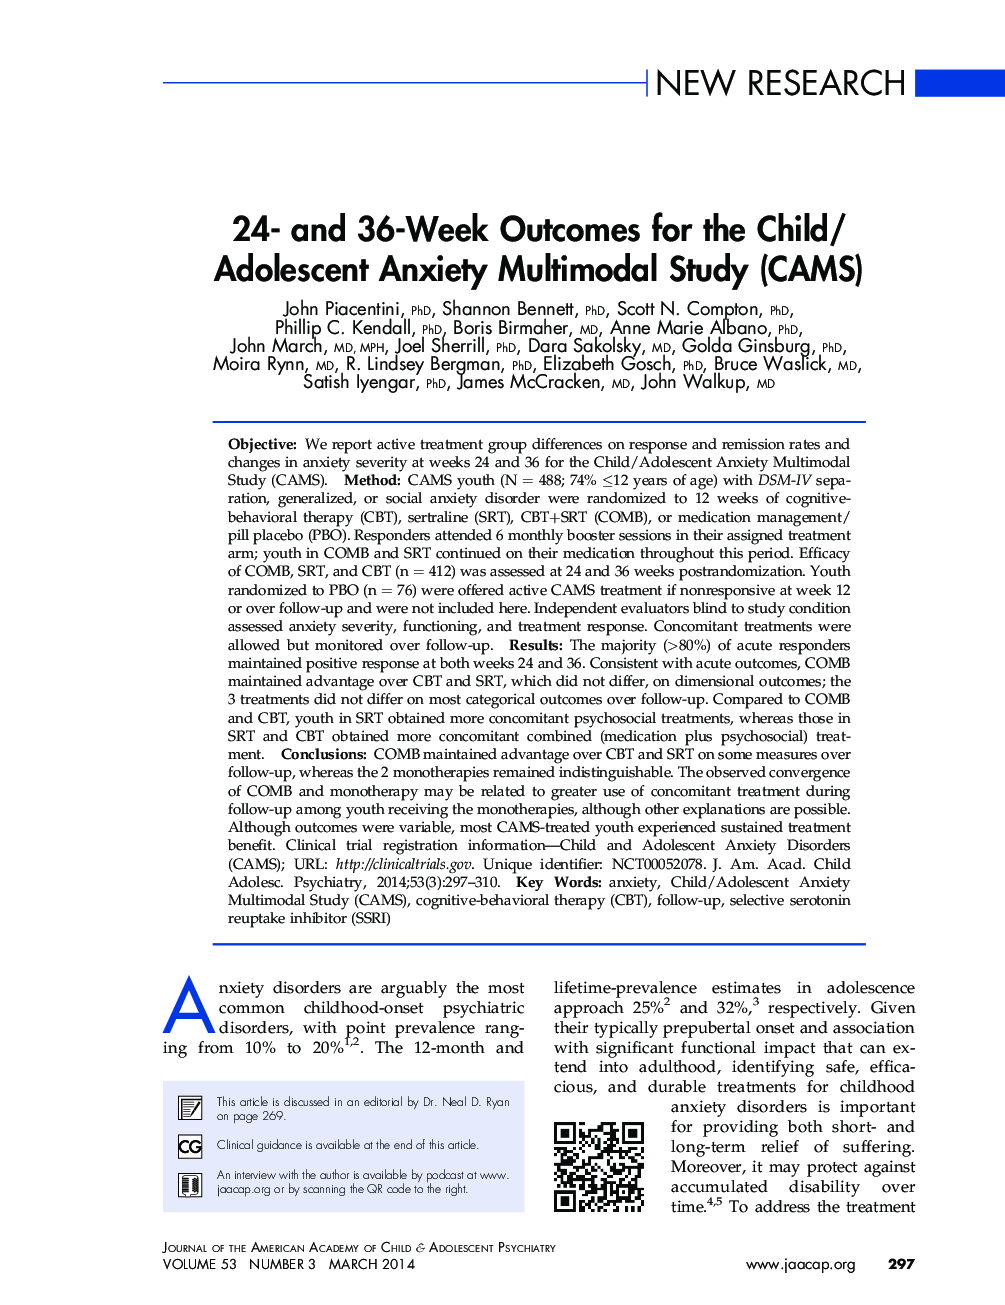 24- and 36-Week Outcomes for the Child/Adolescent Anxiety Multimodal Study (CAMS) 